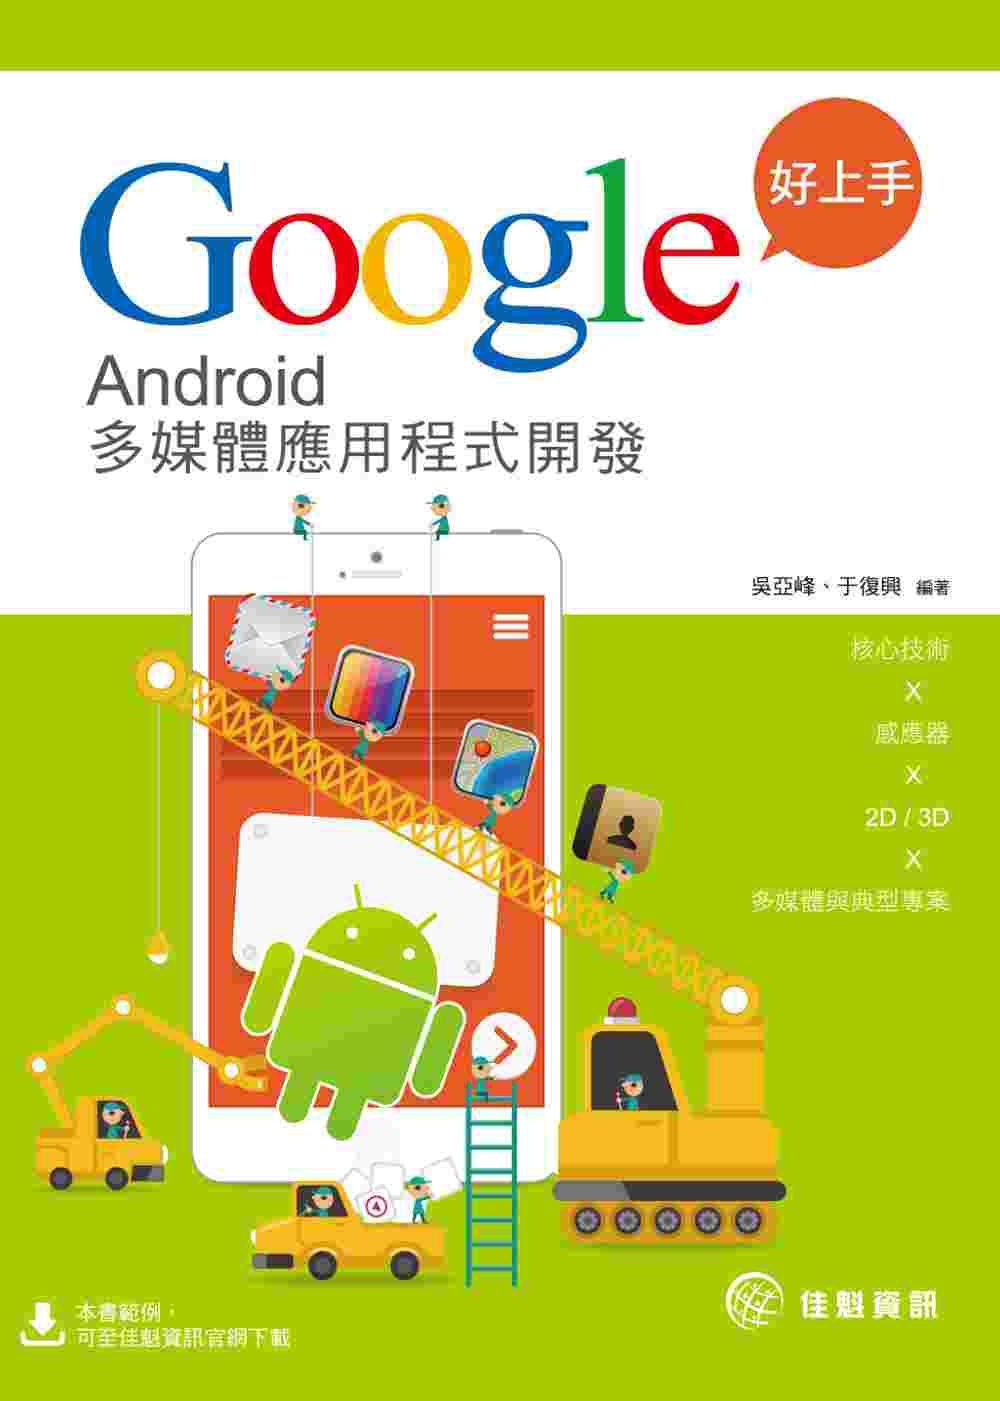 Google好上手：Android